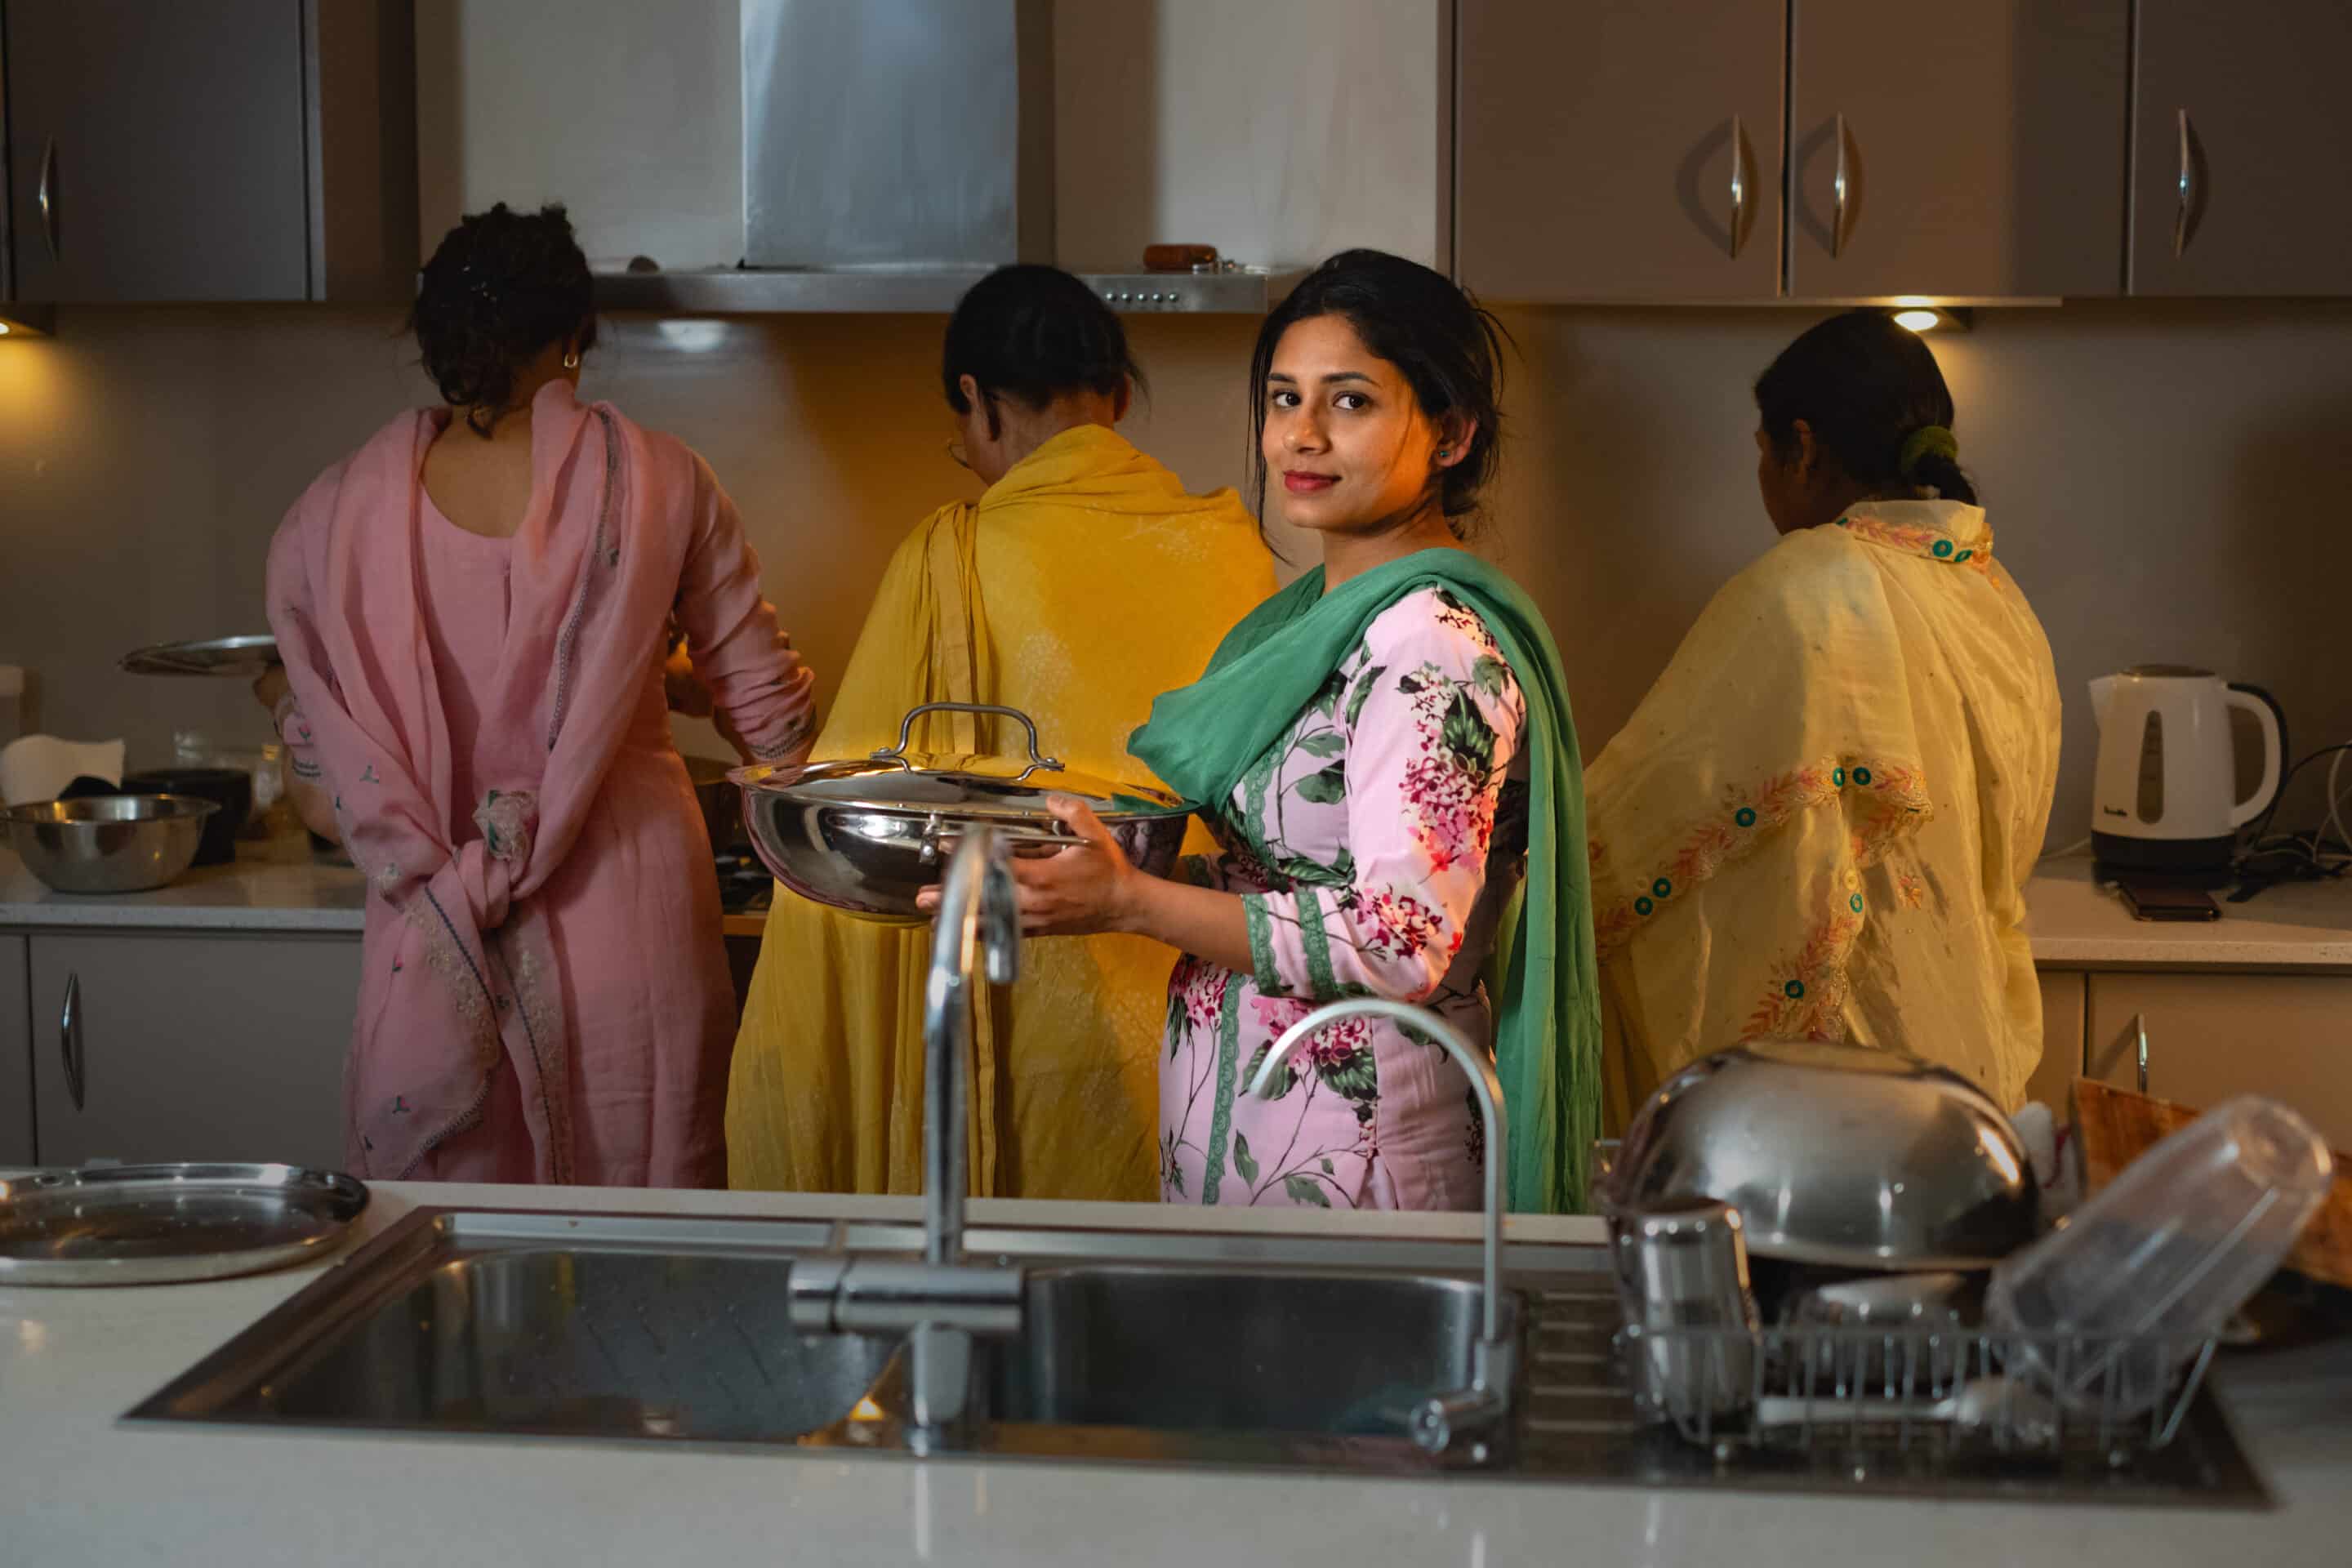 Indian woman in the kitchen in traditional dress, holding a bowl of food.